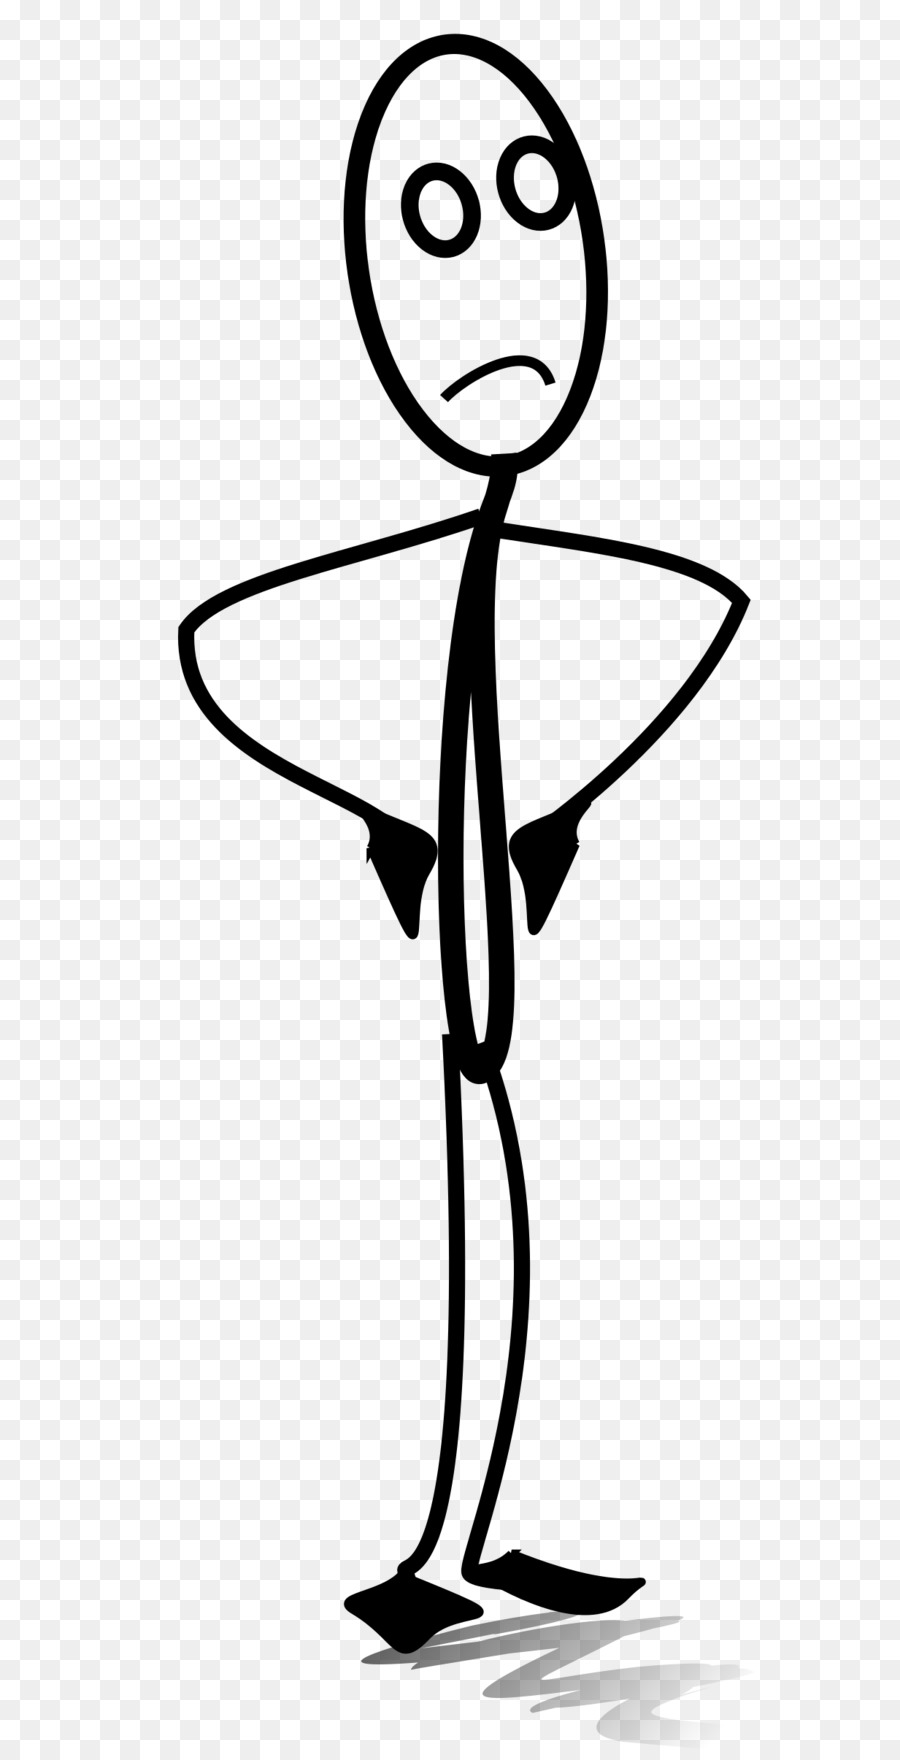 Stick figure Drawing Clip art - others png download - 1233*2400 - Free Transparent Stick Figure png Download.